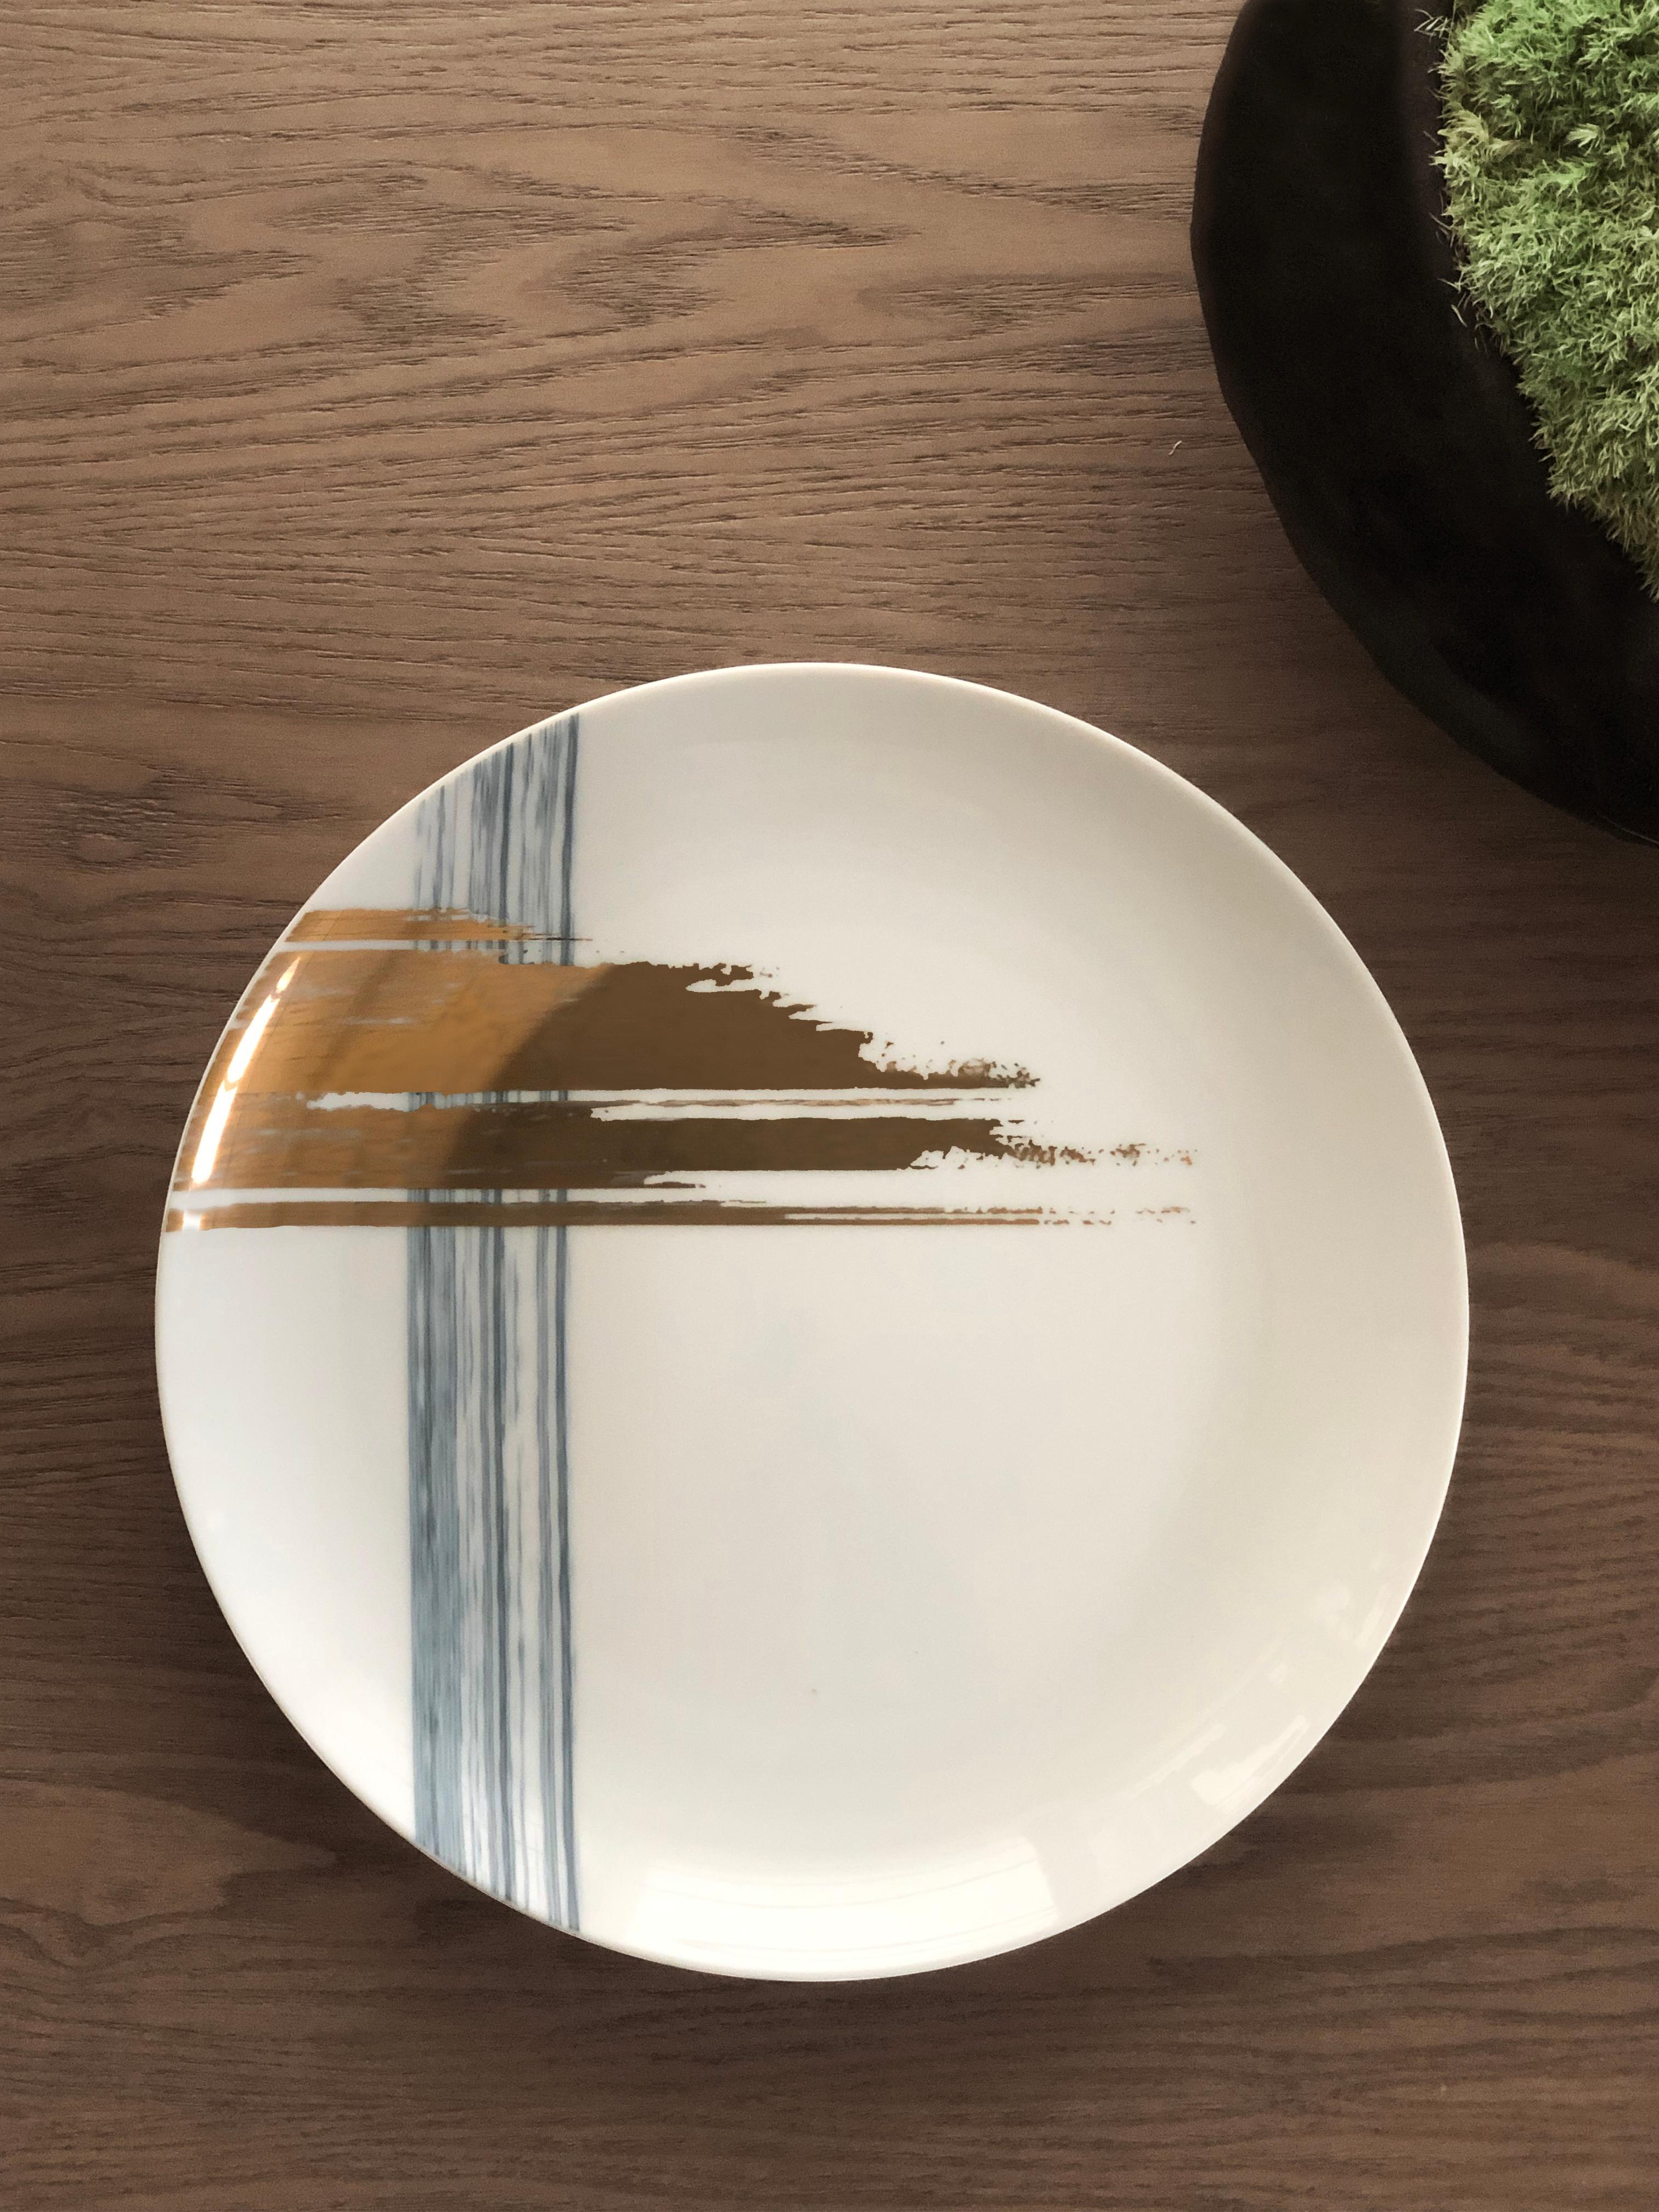 Larger quantities available upon request, with 8 weeks production time.

Description: Dinner plate (2 pieces)
Color: Blue and gold
Size: 26.5 Ø x 2.5 H cm
Material: Porcelain and gold
Collection: Artisan Brush.